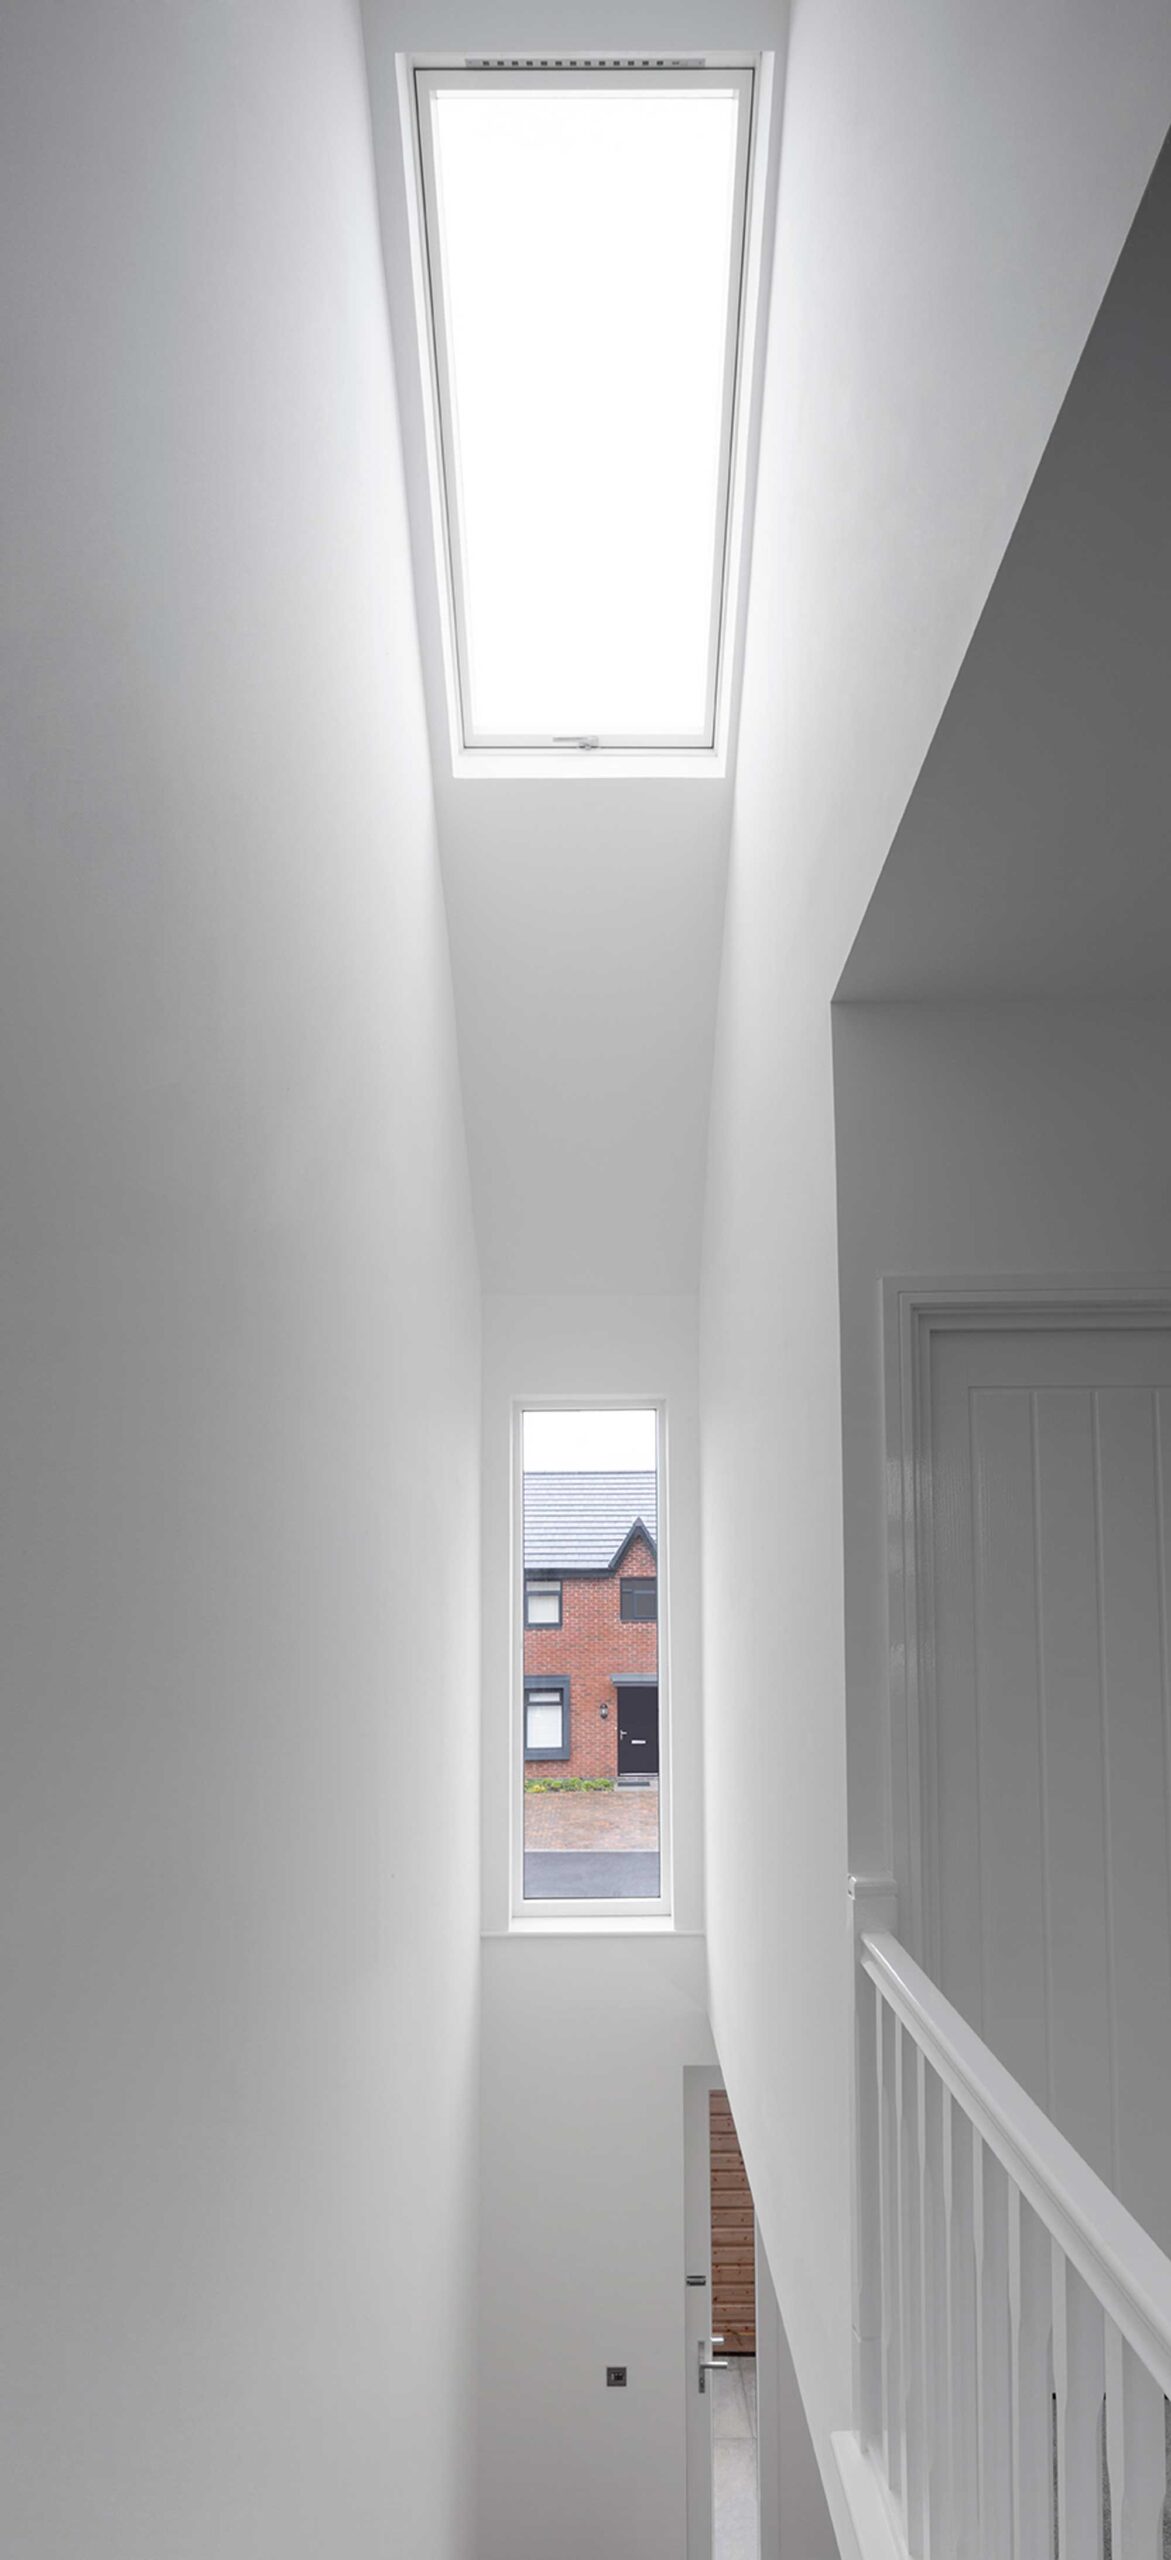 taylor-wimpey-openstudio-architects-stair-to-entrance